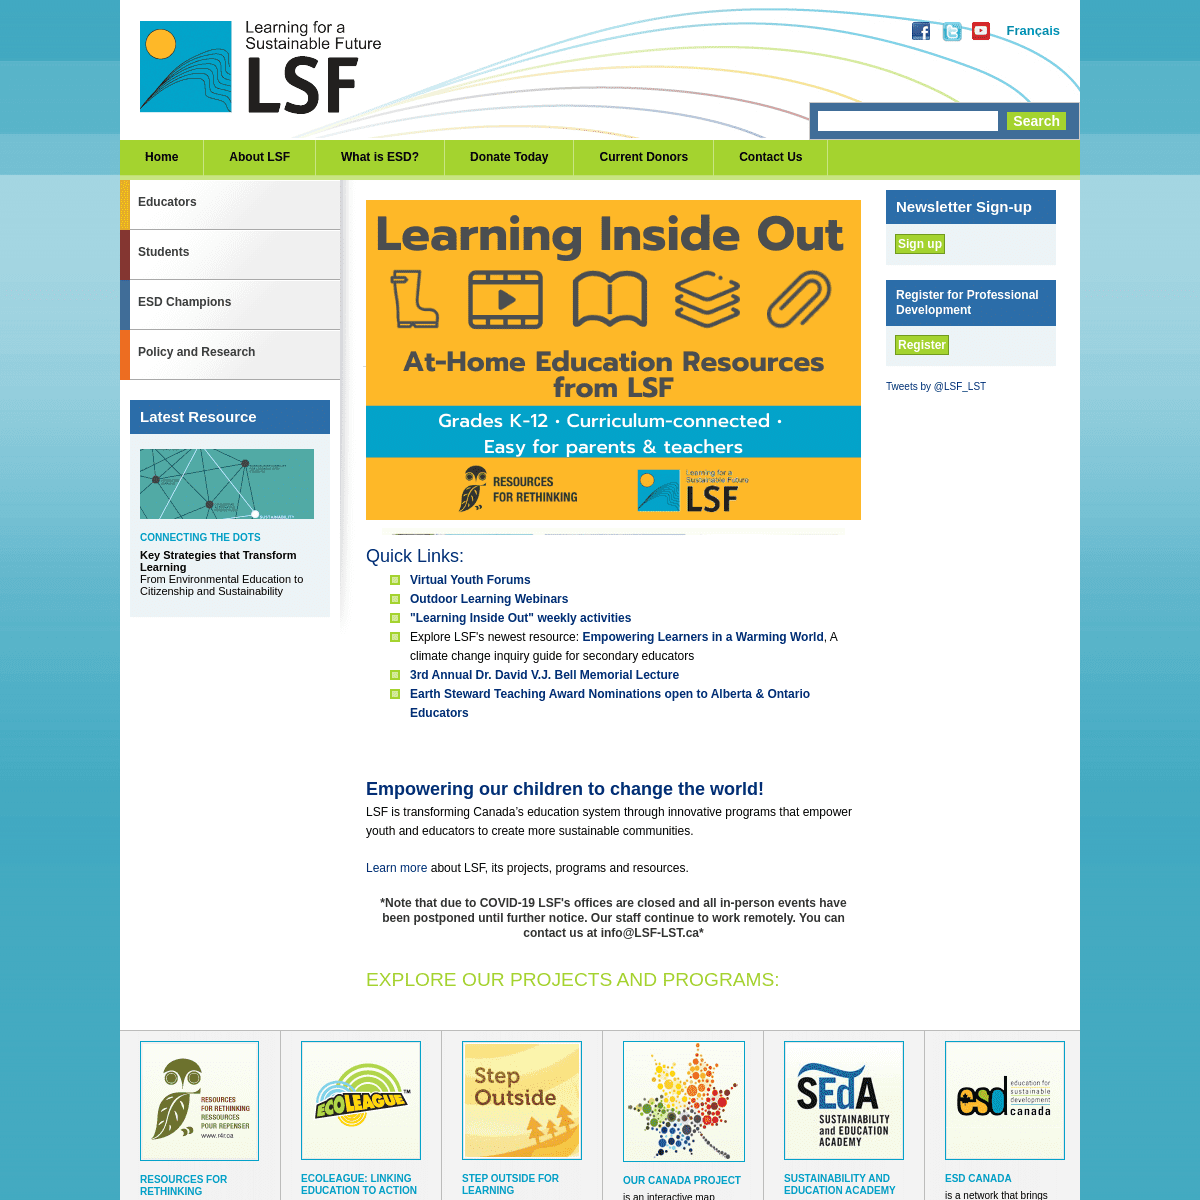 A complete backup of https://lsf-lst.ca